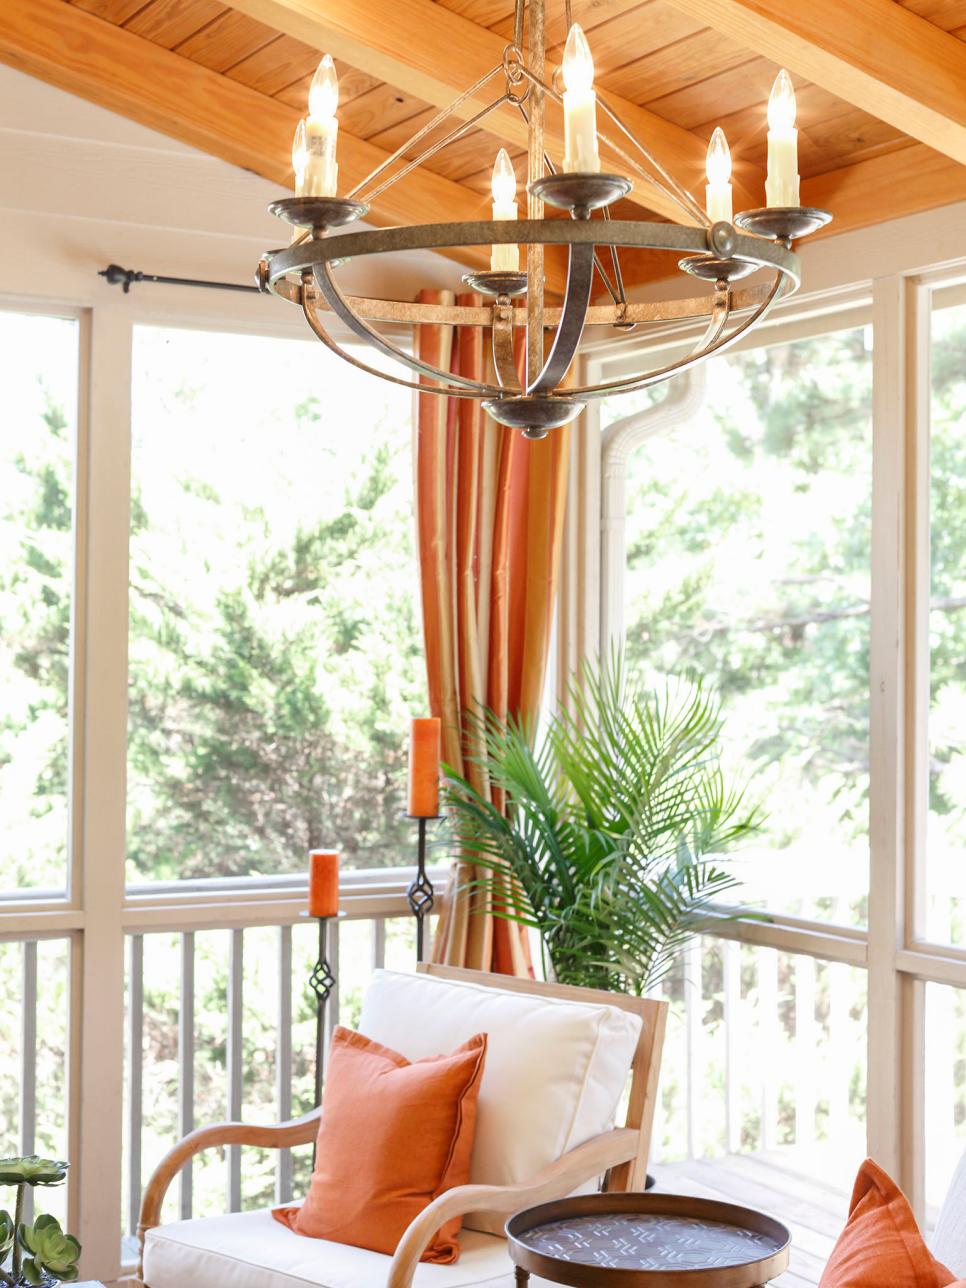 Contemporary Sunroom With Industrial Chandelier | HGTV